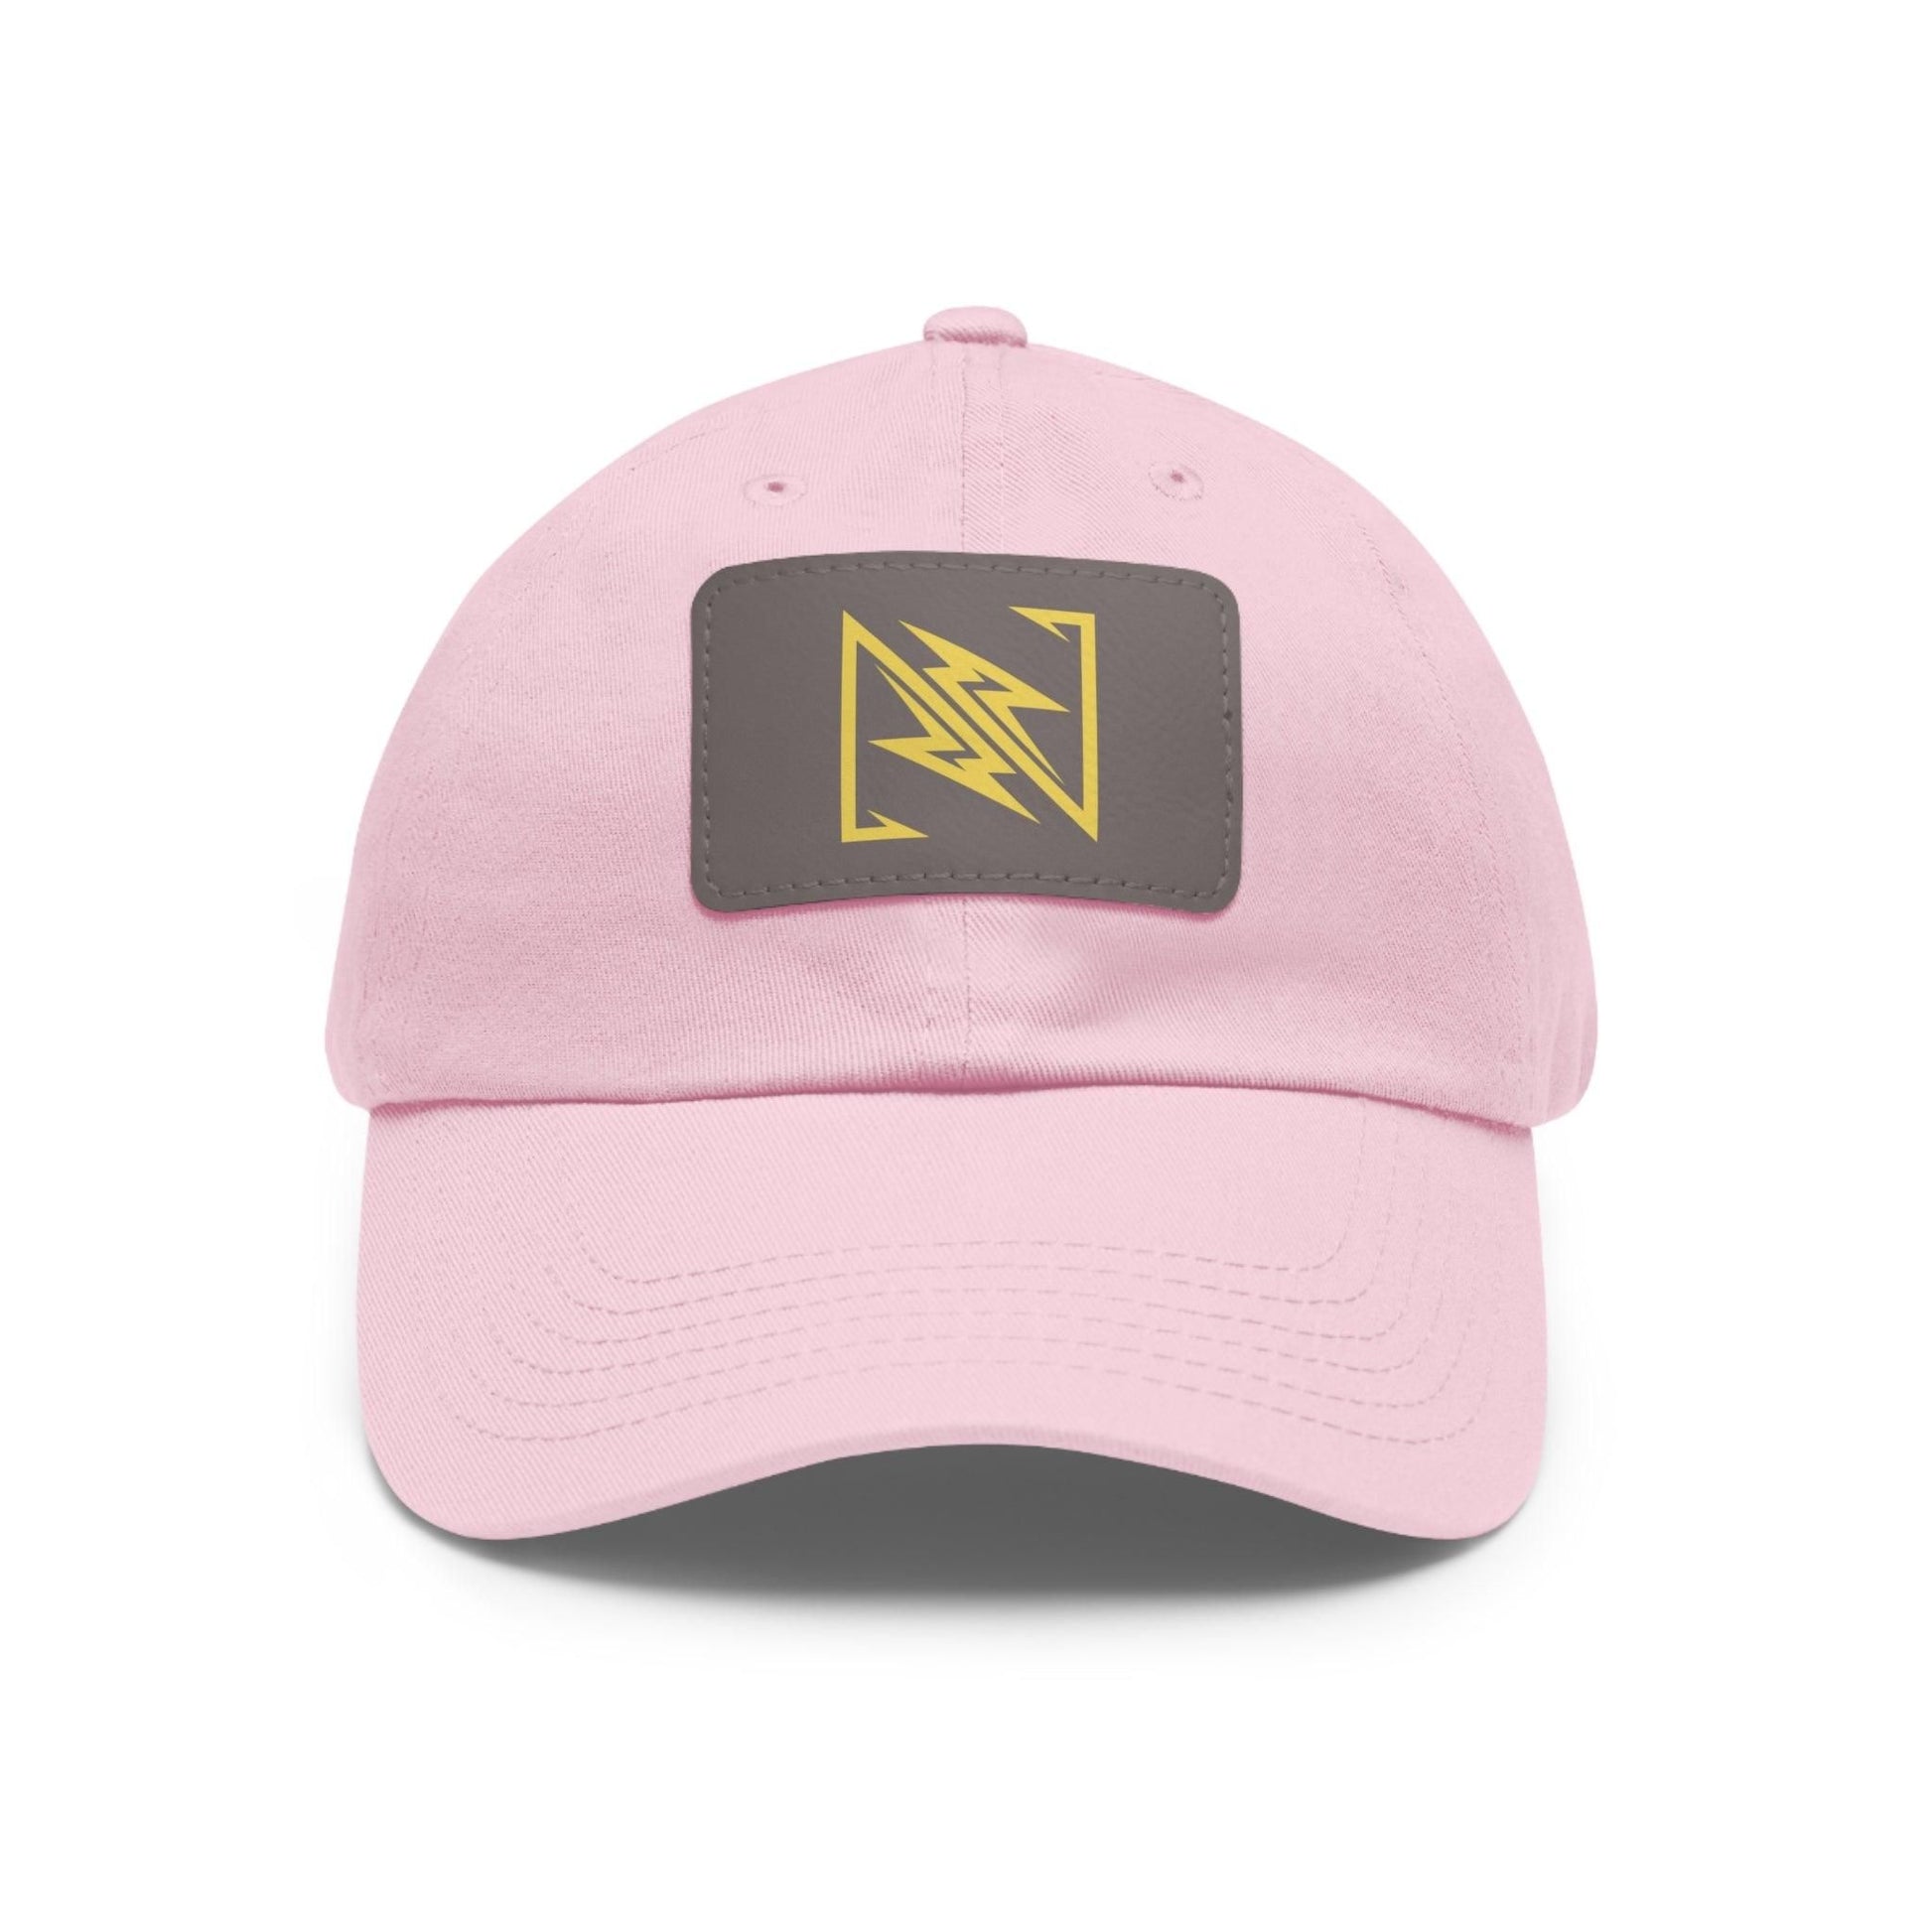 NX Vogue Premium Baseball Hat with Leather Patch Cap Light Pink / Grey patch Rectangle One size